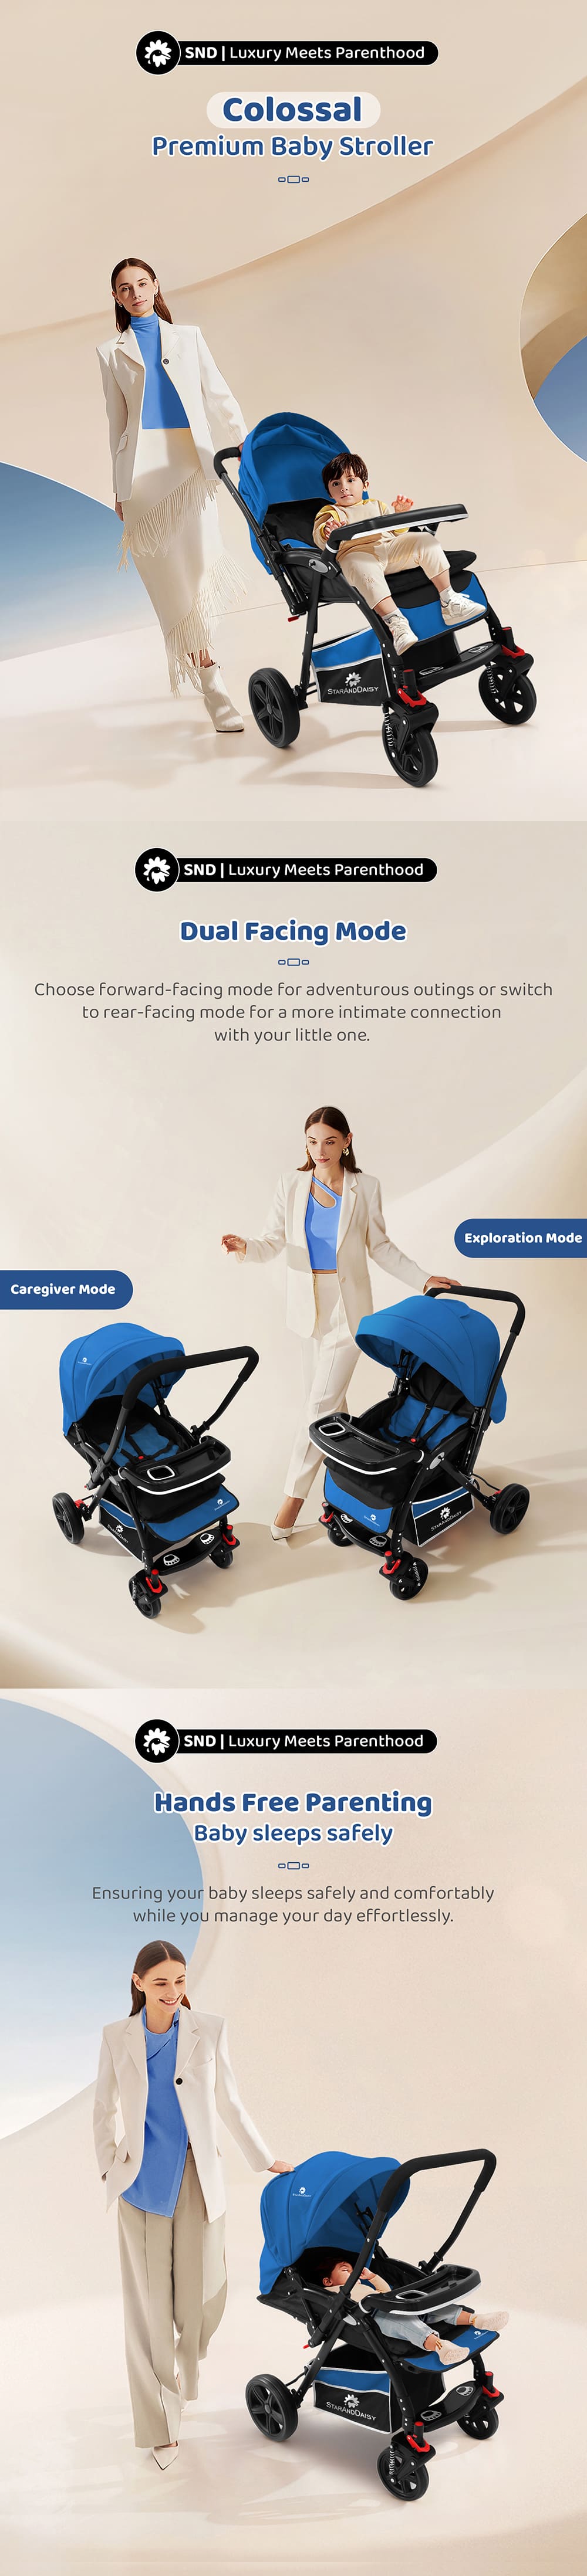 Colosaal Baby Stroller